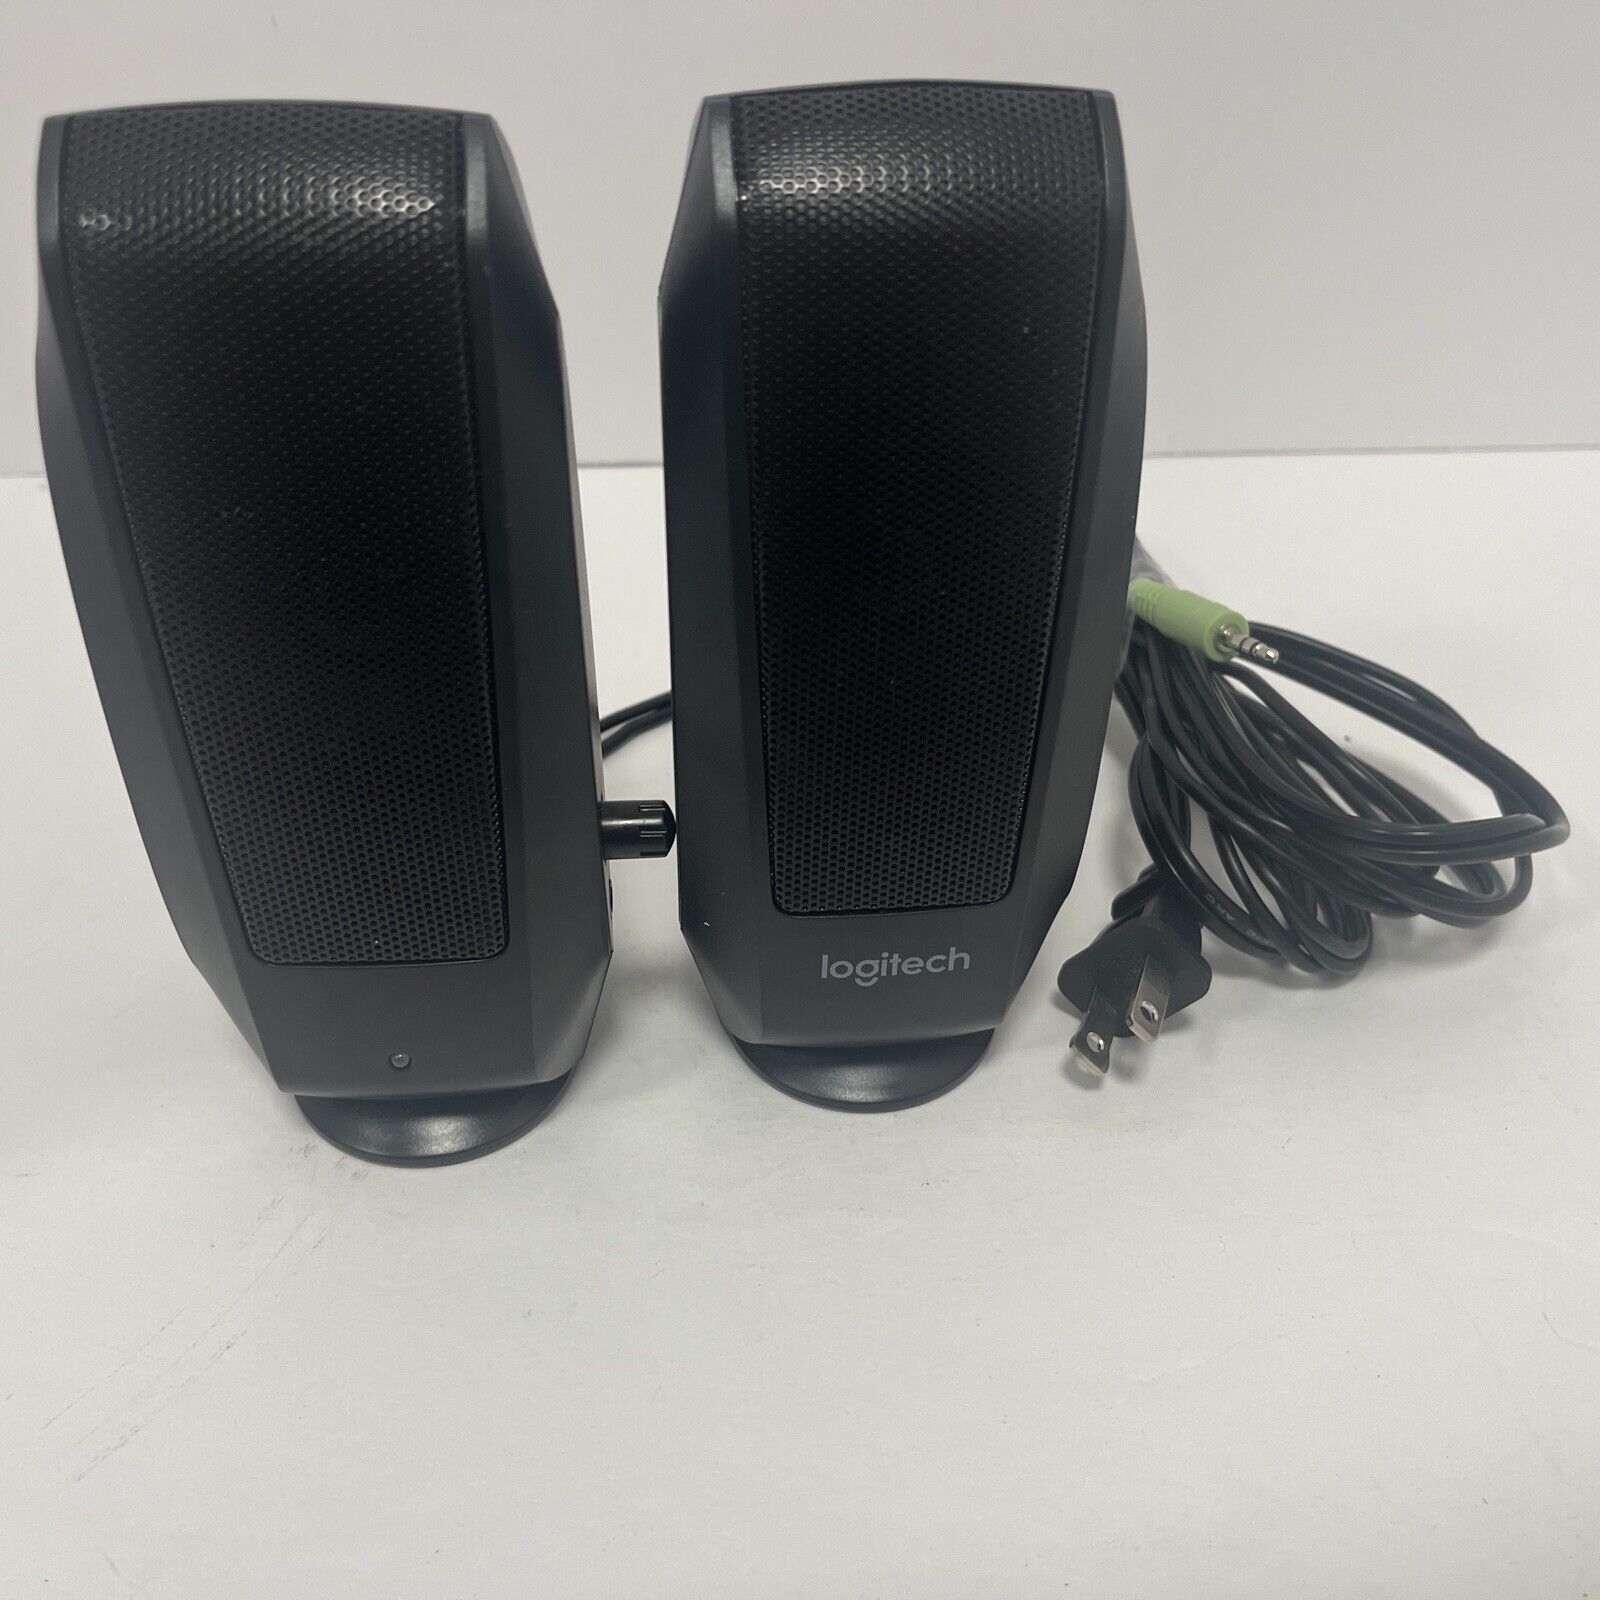 Logitech S-120 2-Piece Stereo Speaker System with Auxiliary Headphone Jack